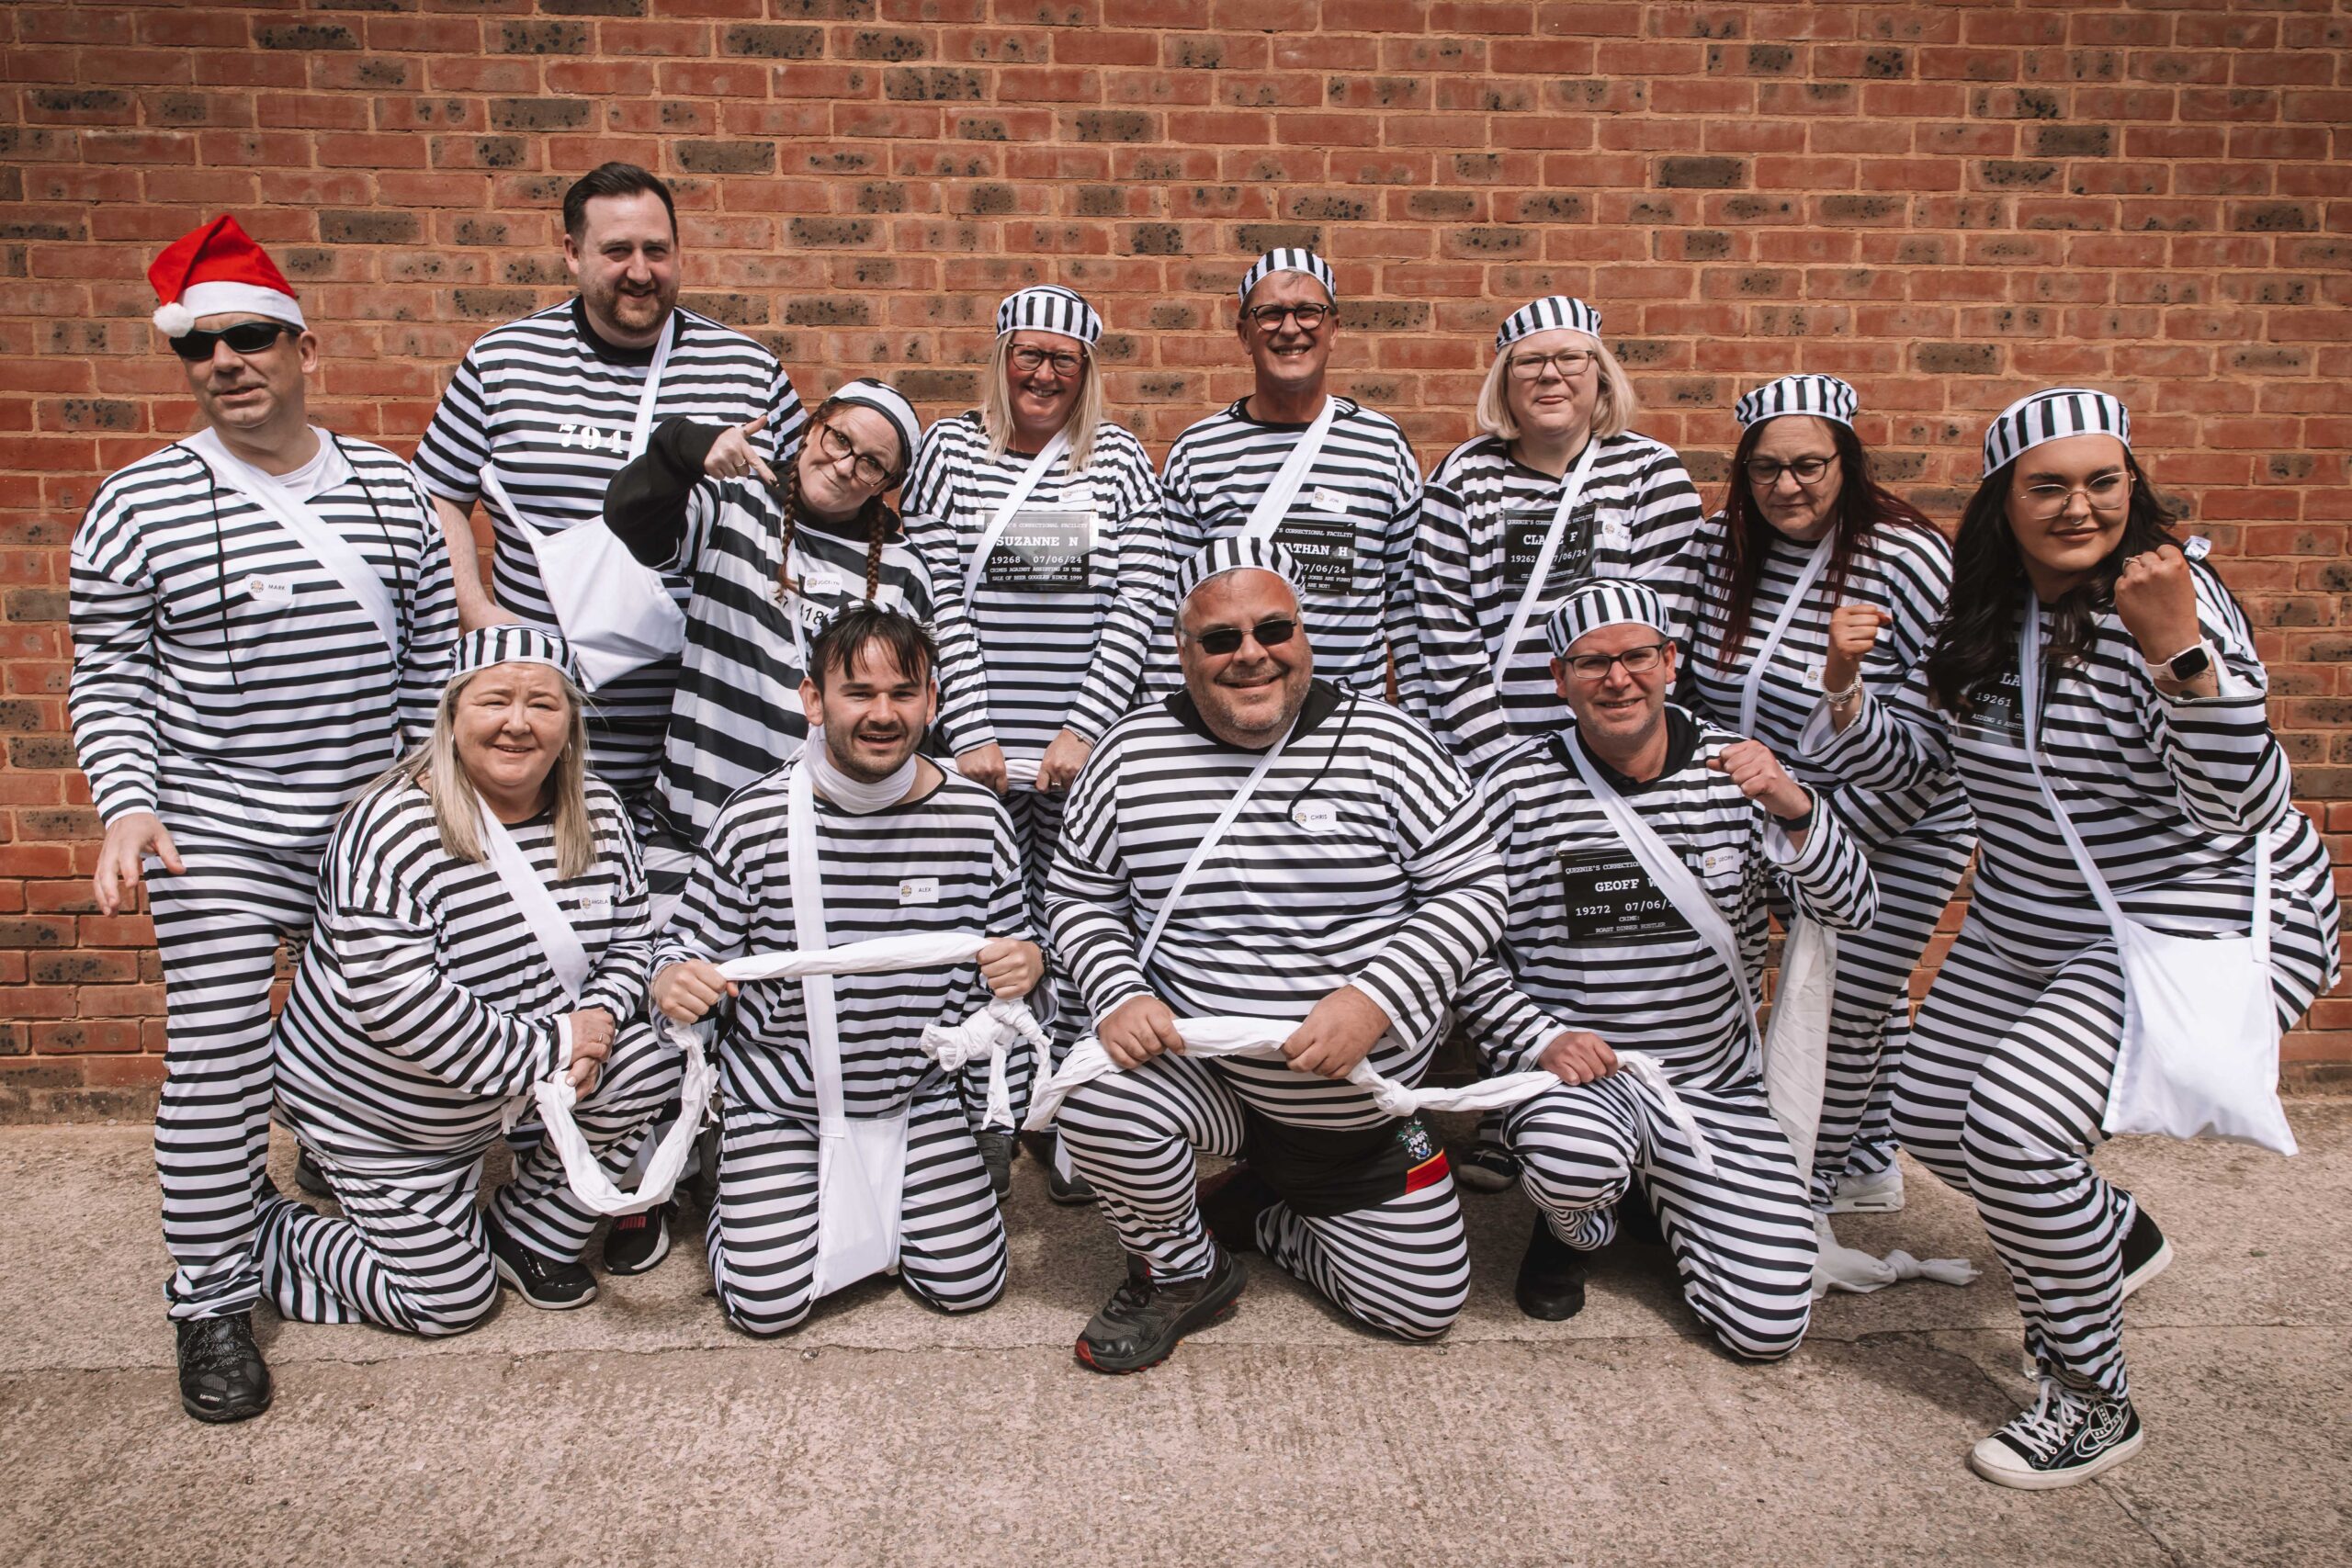 Twelve people have completed a bold escape from the cells at Southport Police Station in the annual Jail and Bail fundraiser for Queenscourt Hospice. Inmates at Southport Police Station 